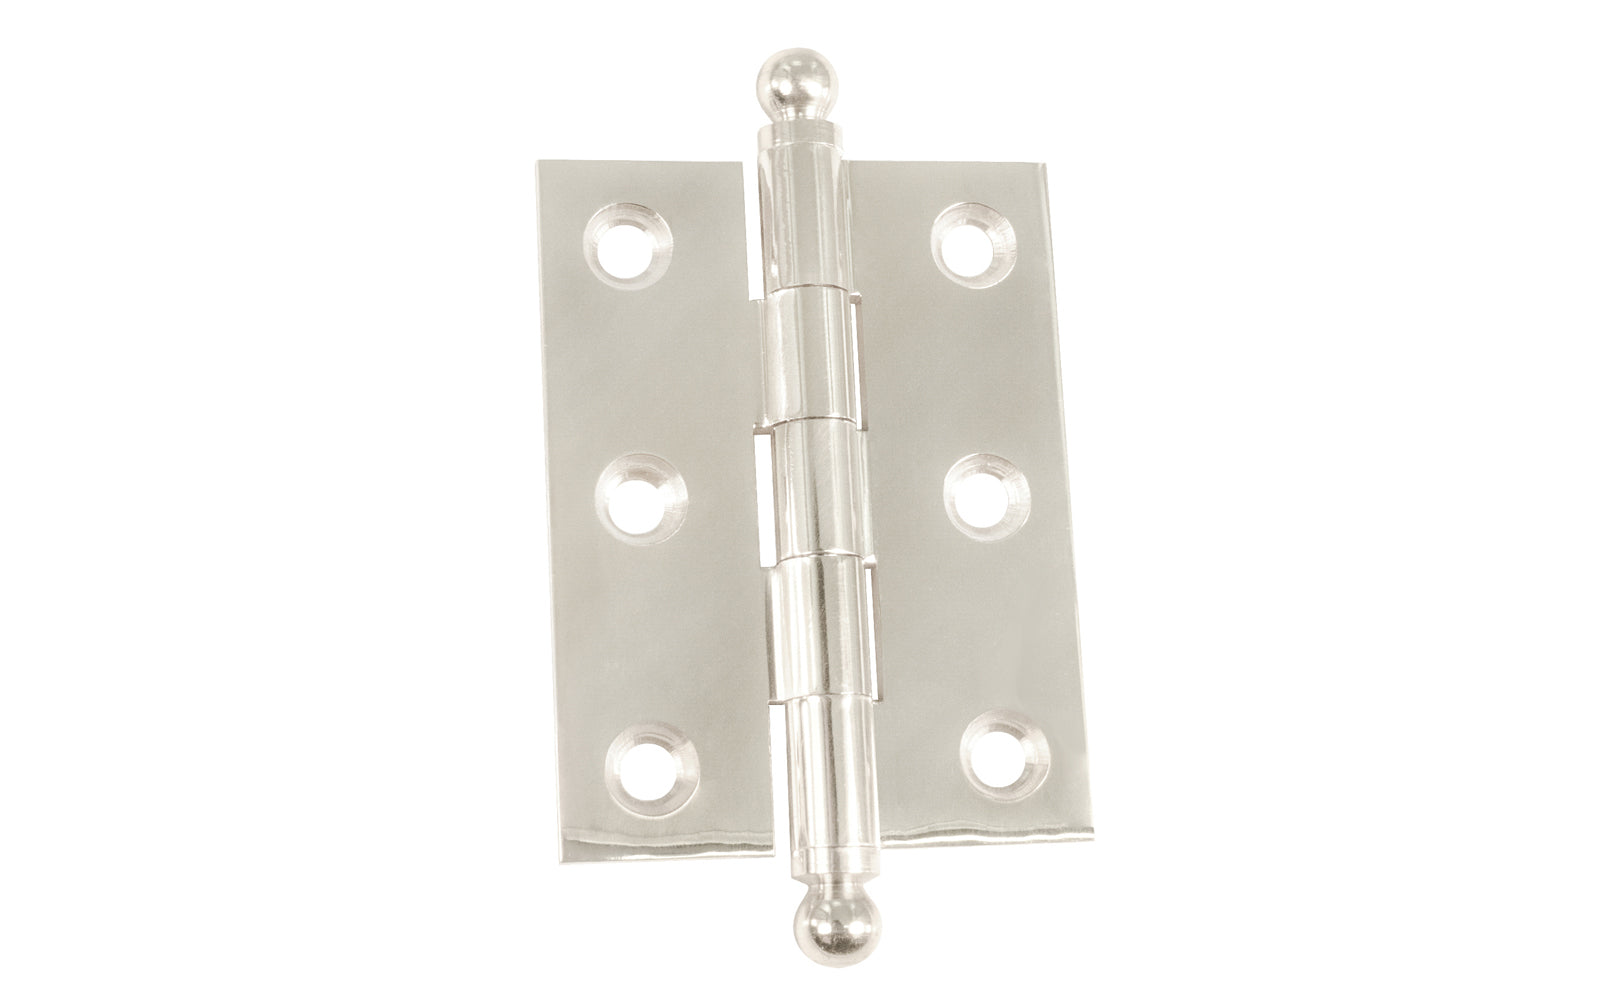 Classic Solid Brass Ball-Tip Cabinet Hinge ~ 2" x 1-1/2". Full mortise extruded hinges. 3/32" heavy duty leaf thickness gauge. Non-removable fixed hinge pin with ball tips. High quality thick cabinet hinge with ball tips. Polished Nickel finish.